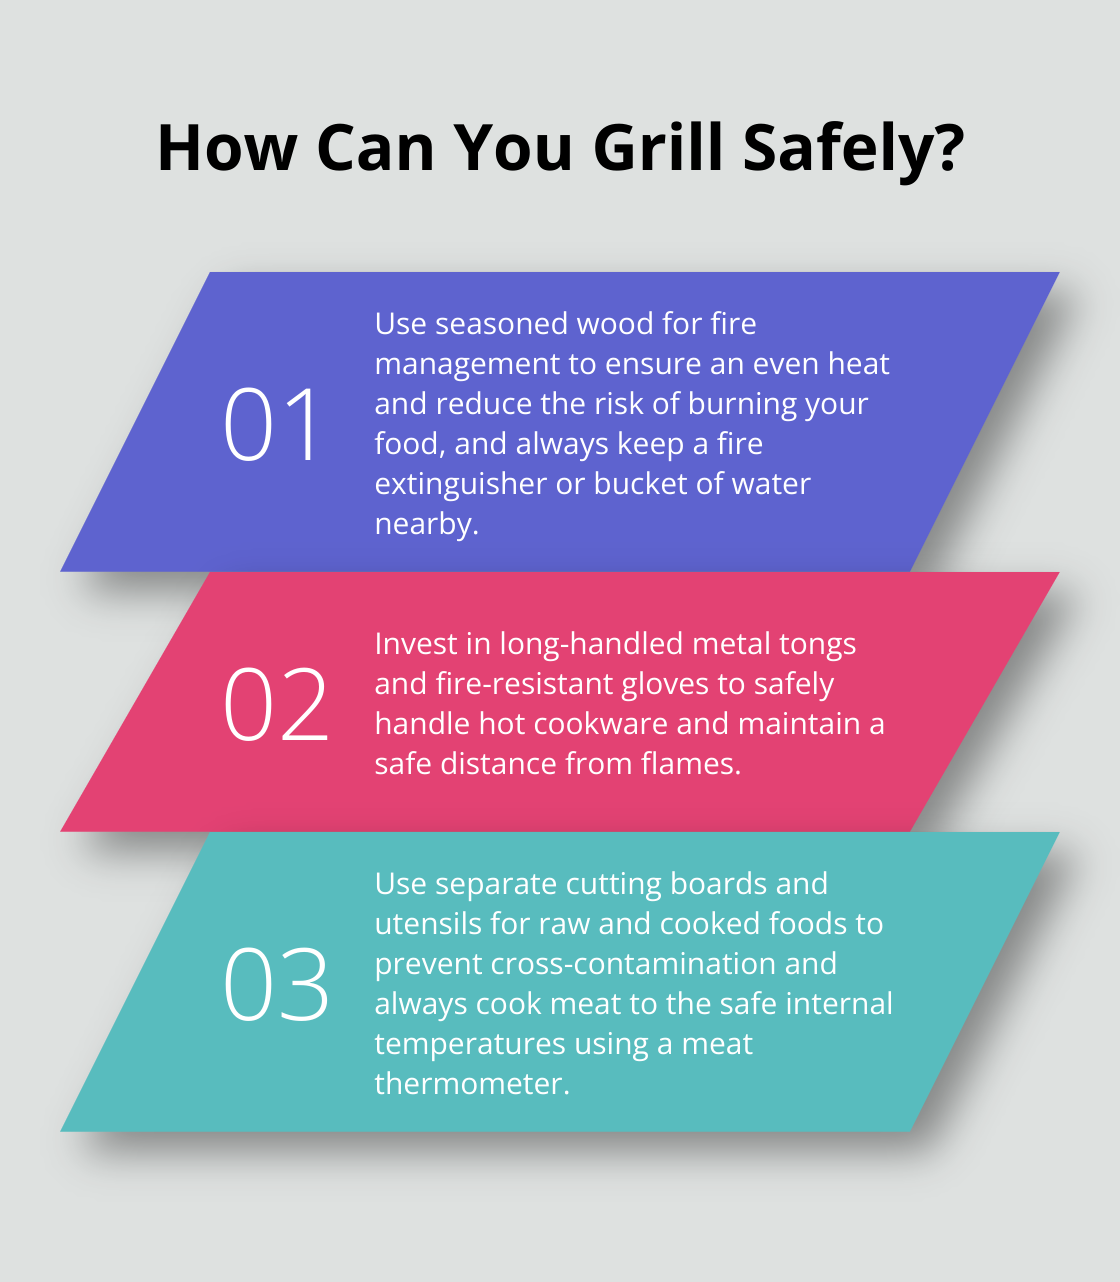 Fact - How Can You Grill Safely?